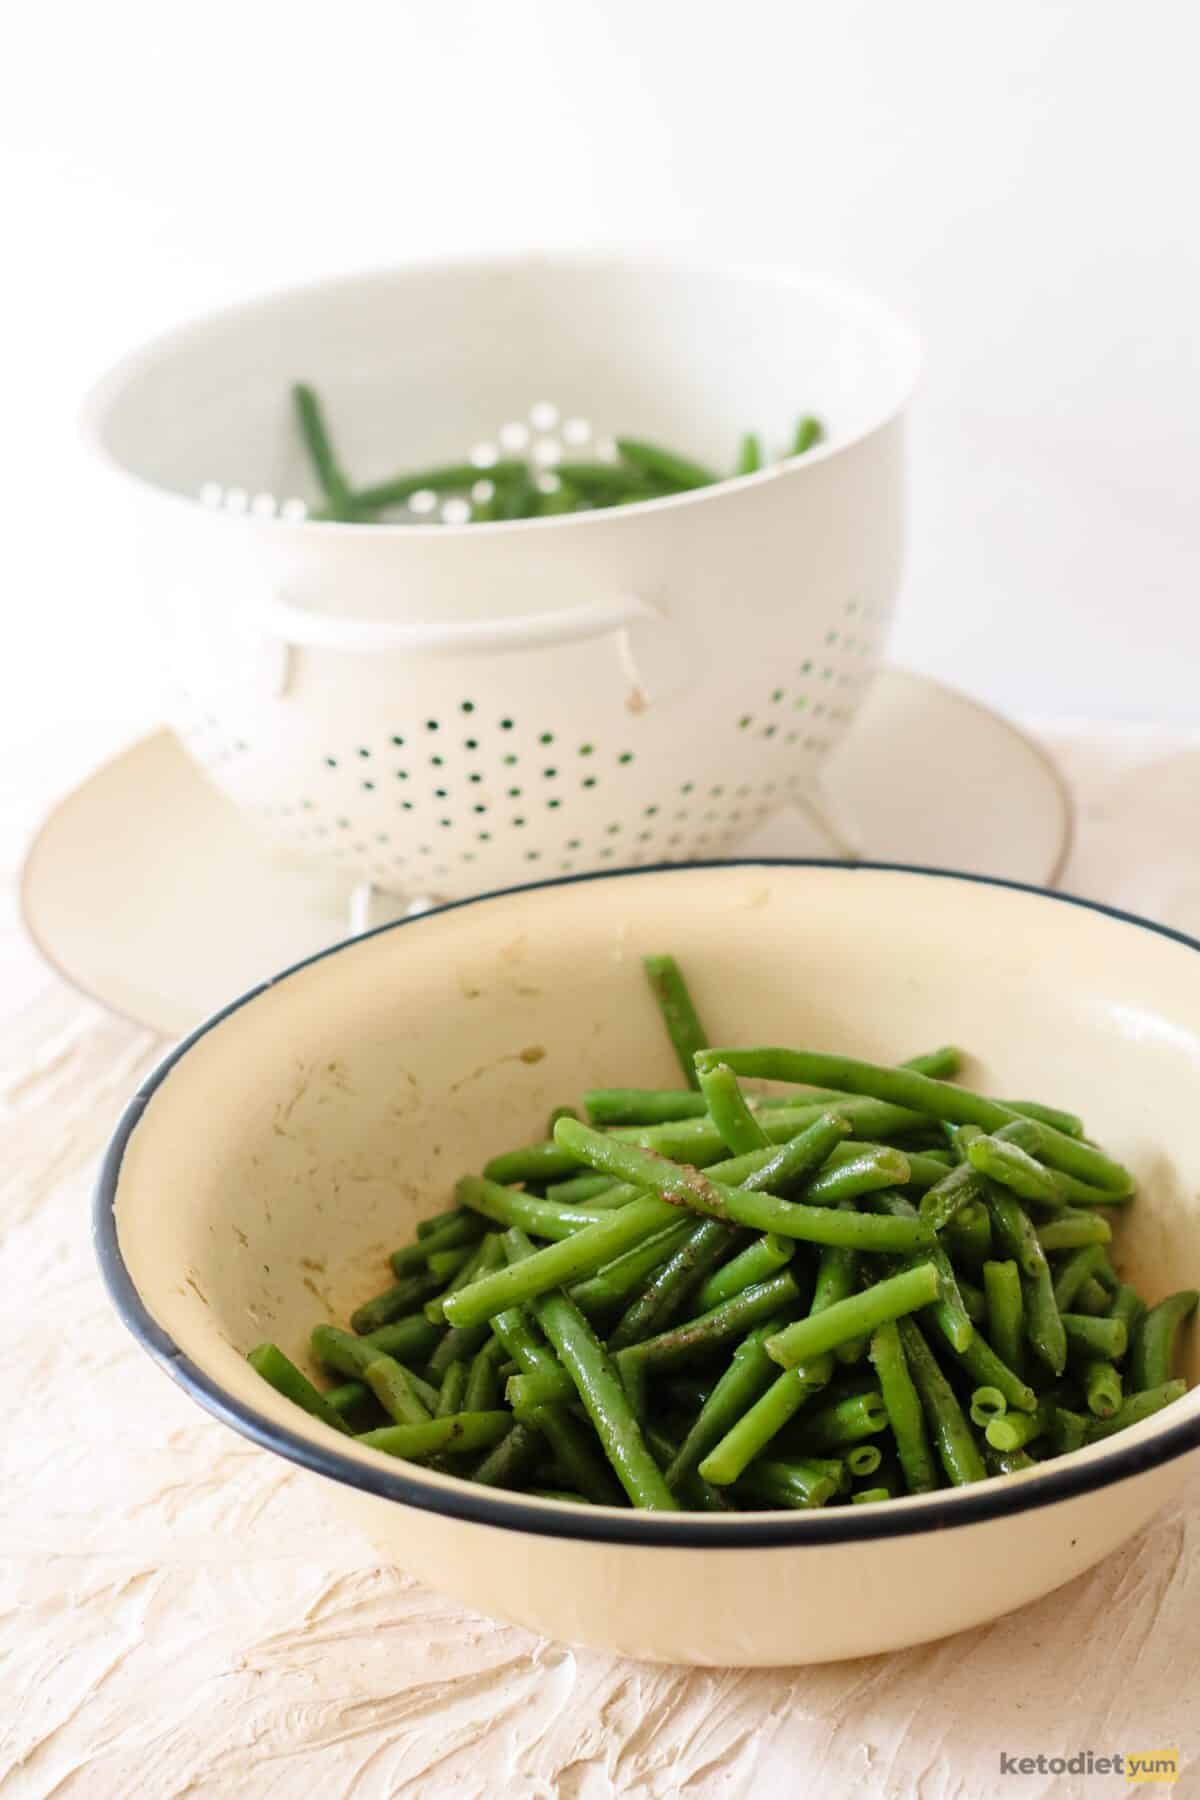 Green beans in a bowl mixed with butter and seasoned with garlic powder, salt and black pepper